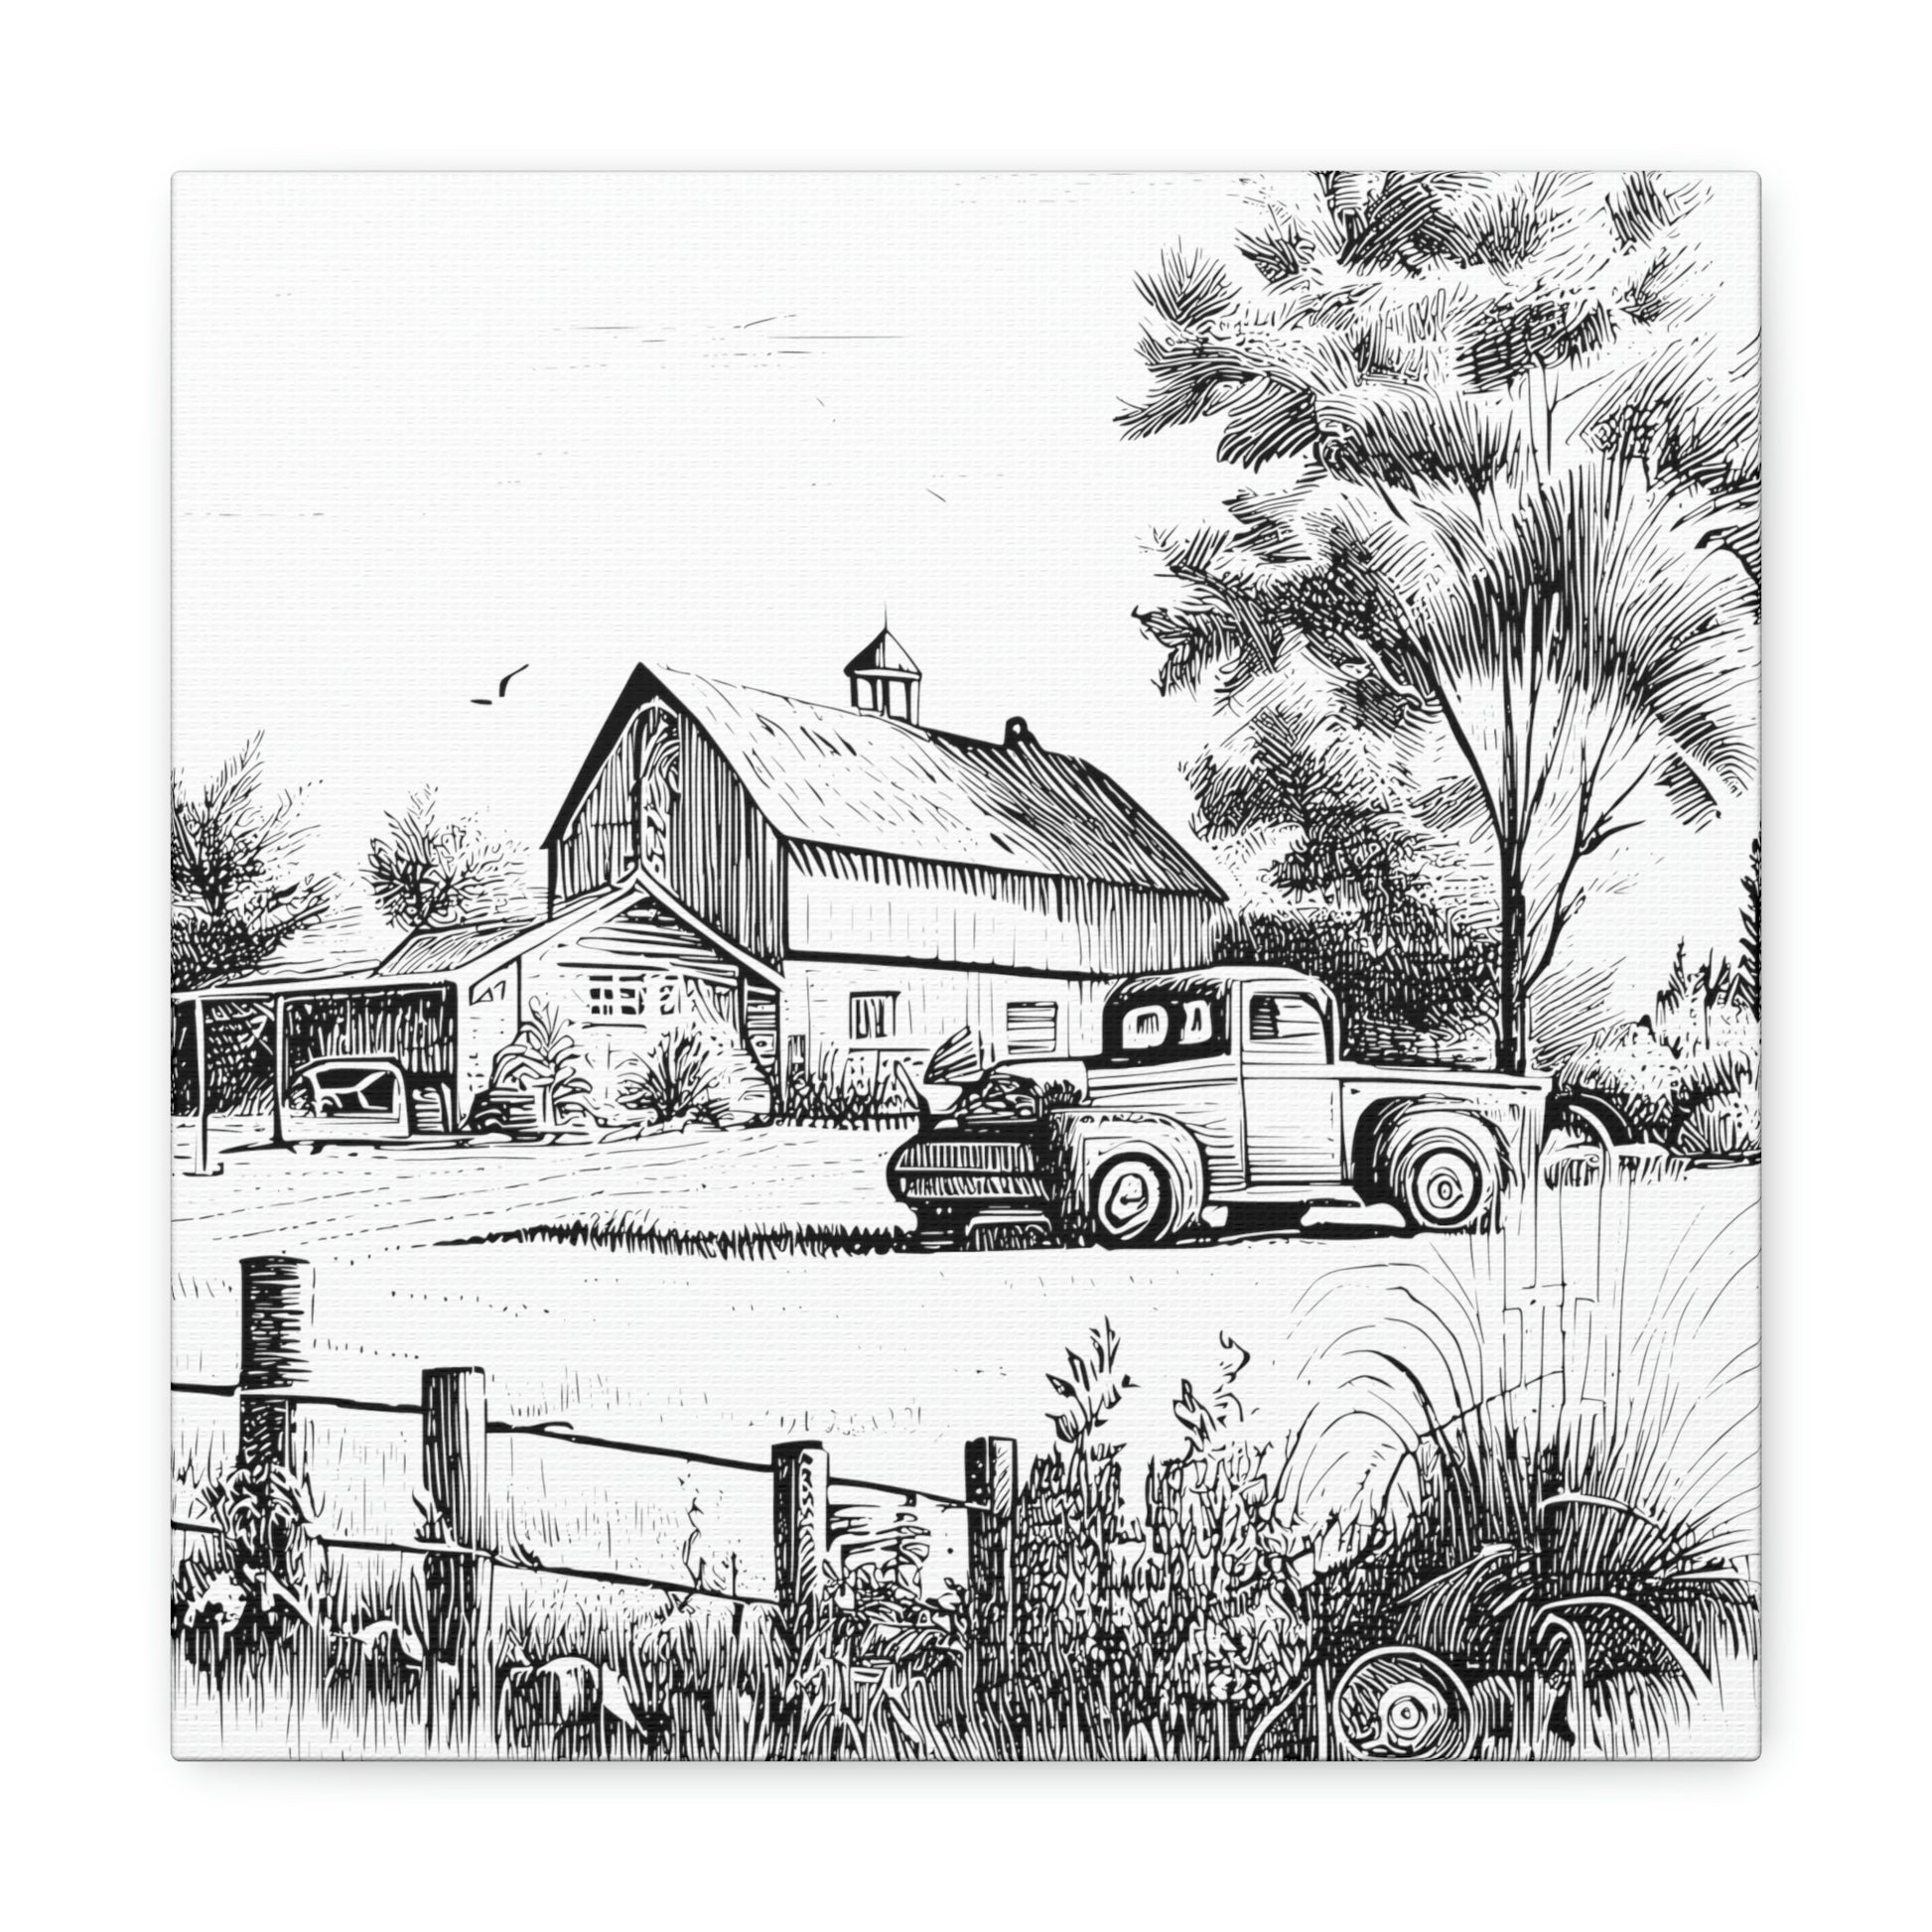 "Rustic Farm Memories" Canvas Wall Art - Weave Got Gifts - Unique Gifts You Won’t Find Anywhere Else!